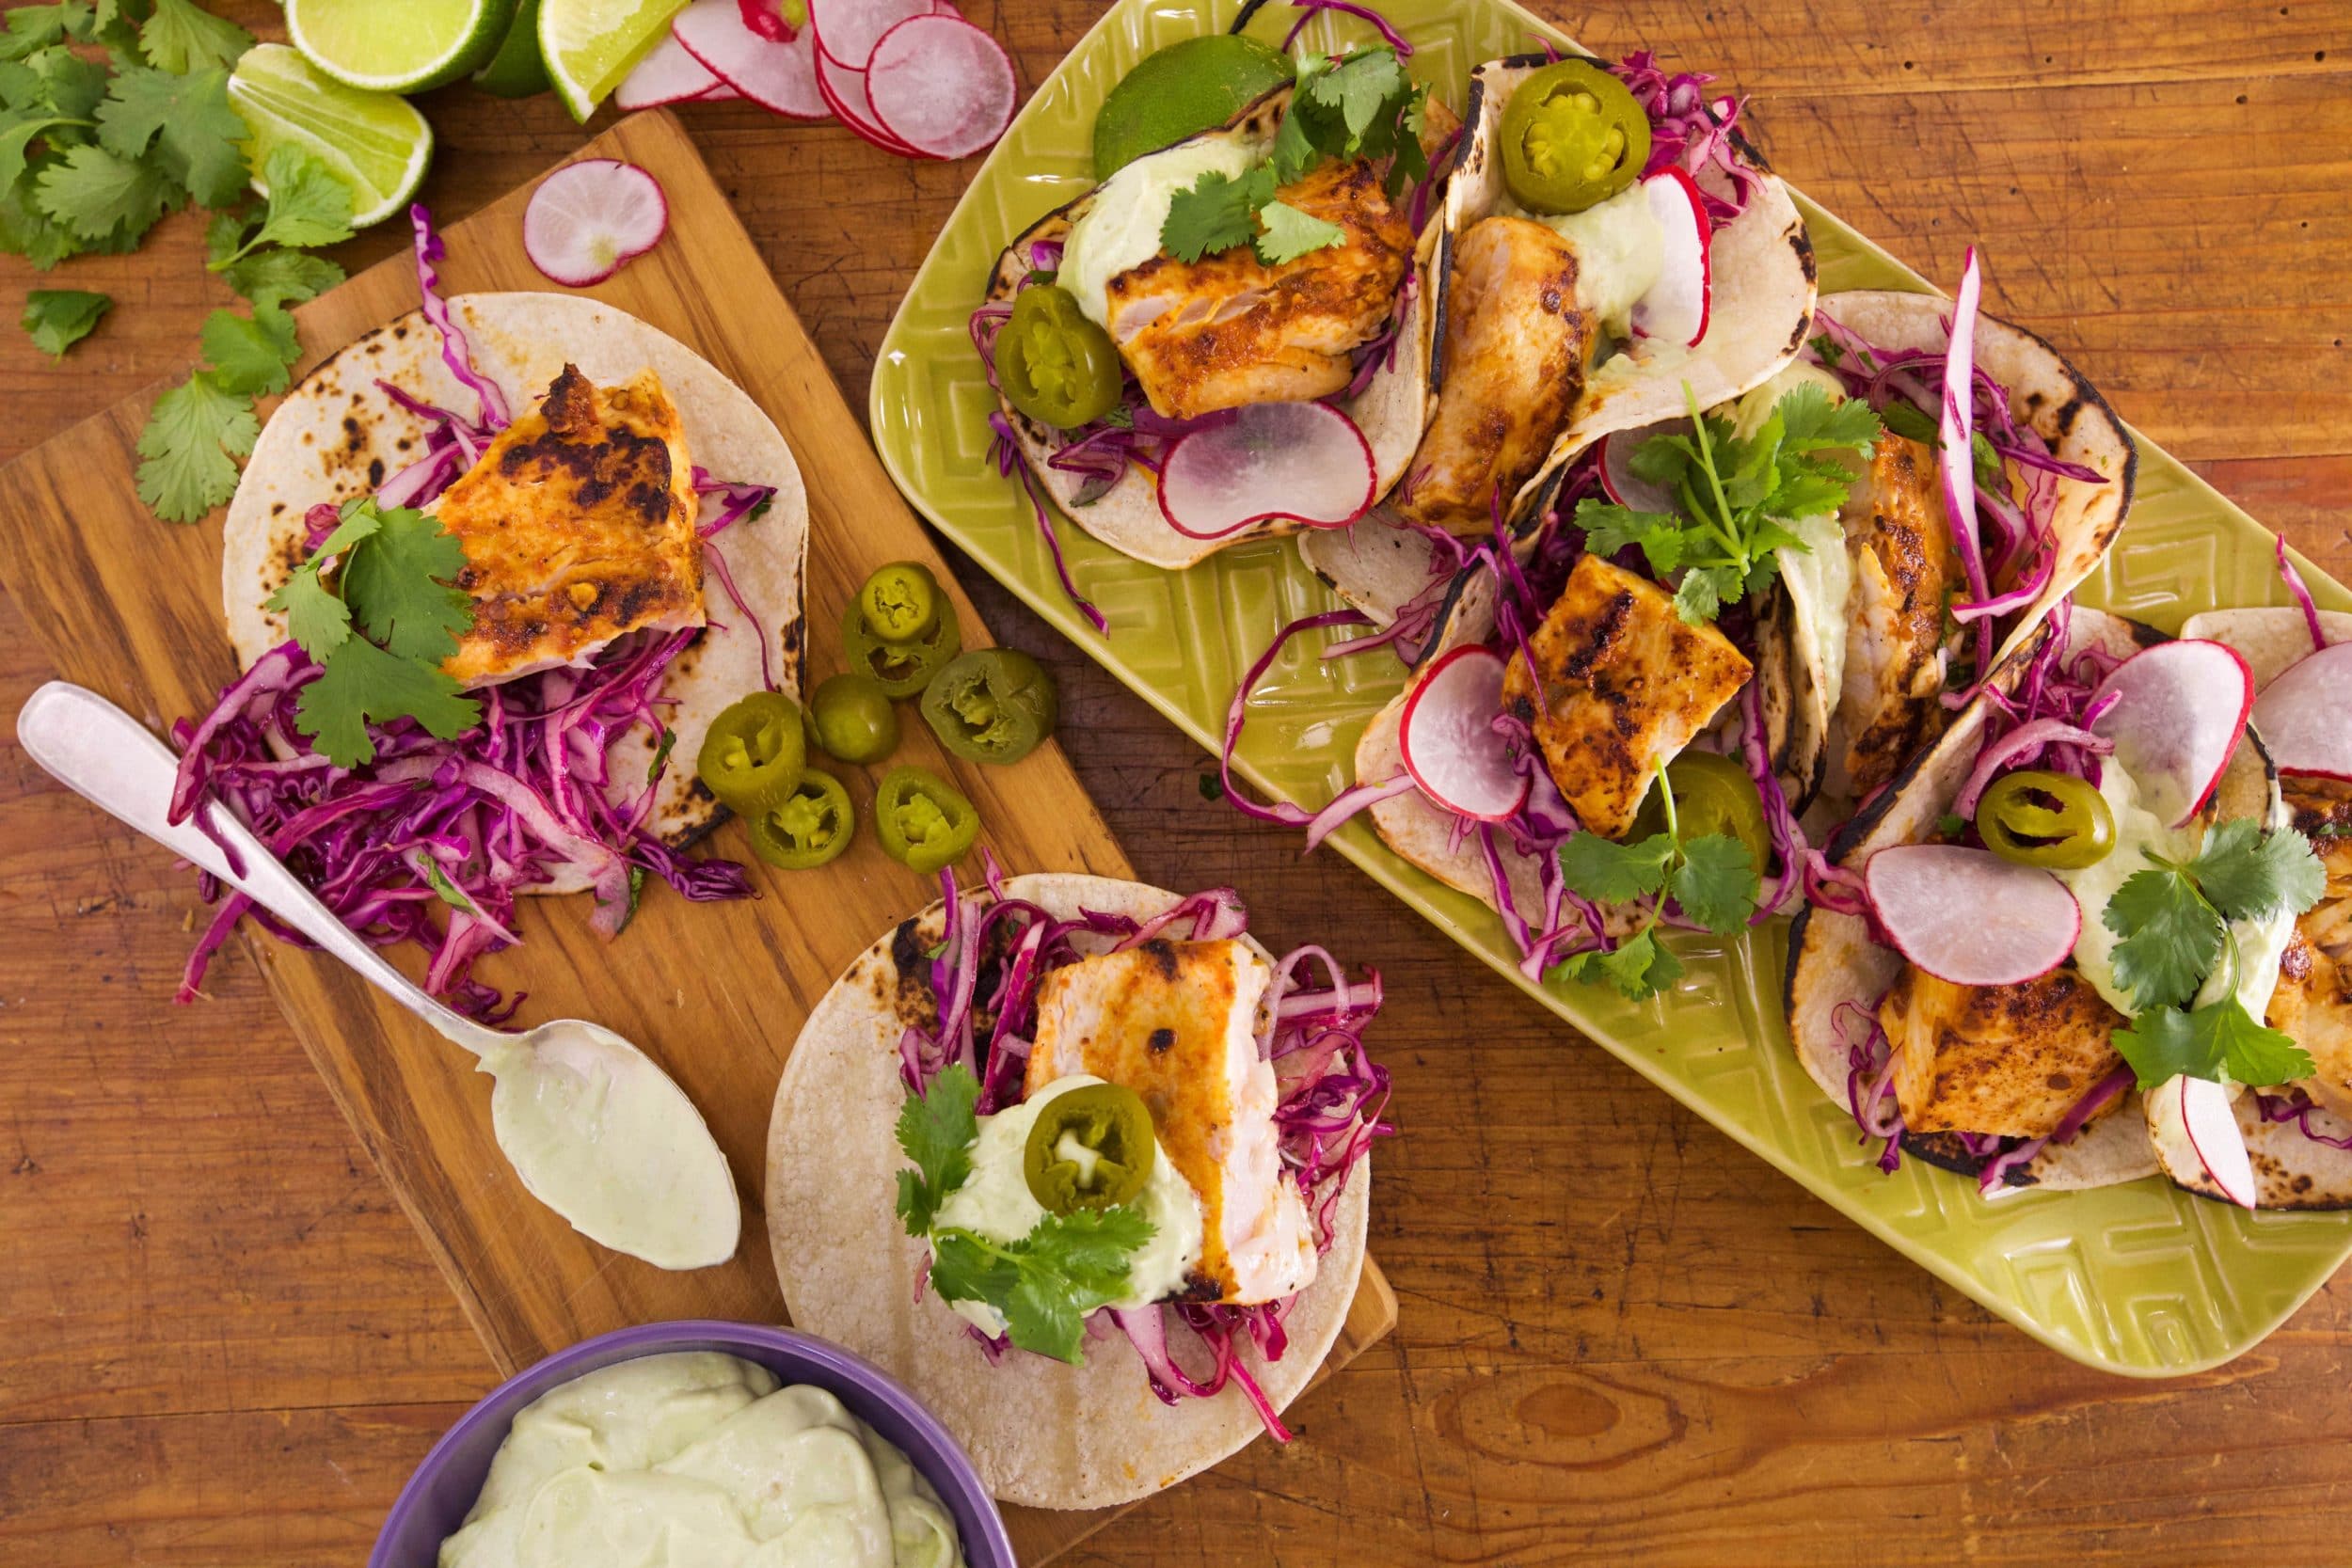 Chipotle Grilled Fish Tacos with Tequila-Lime Slaw and Avocado Crema